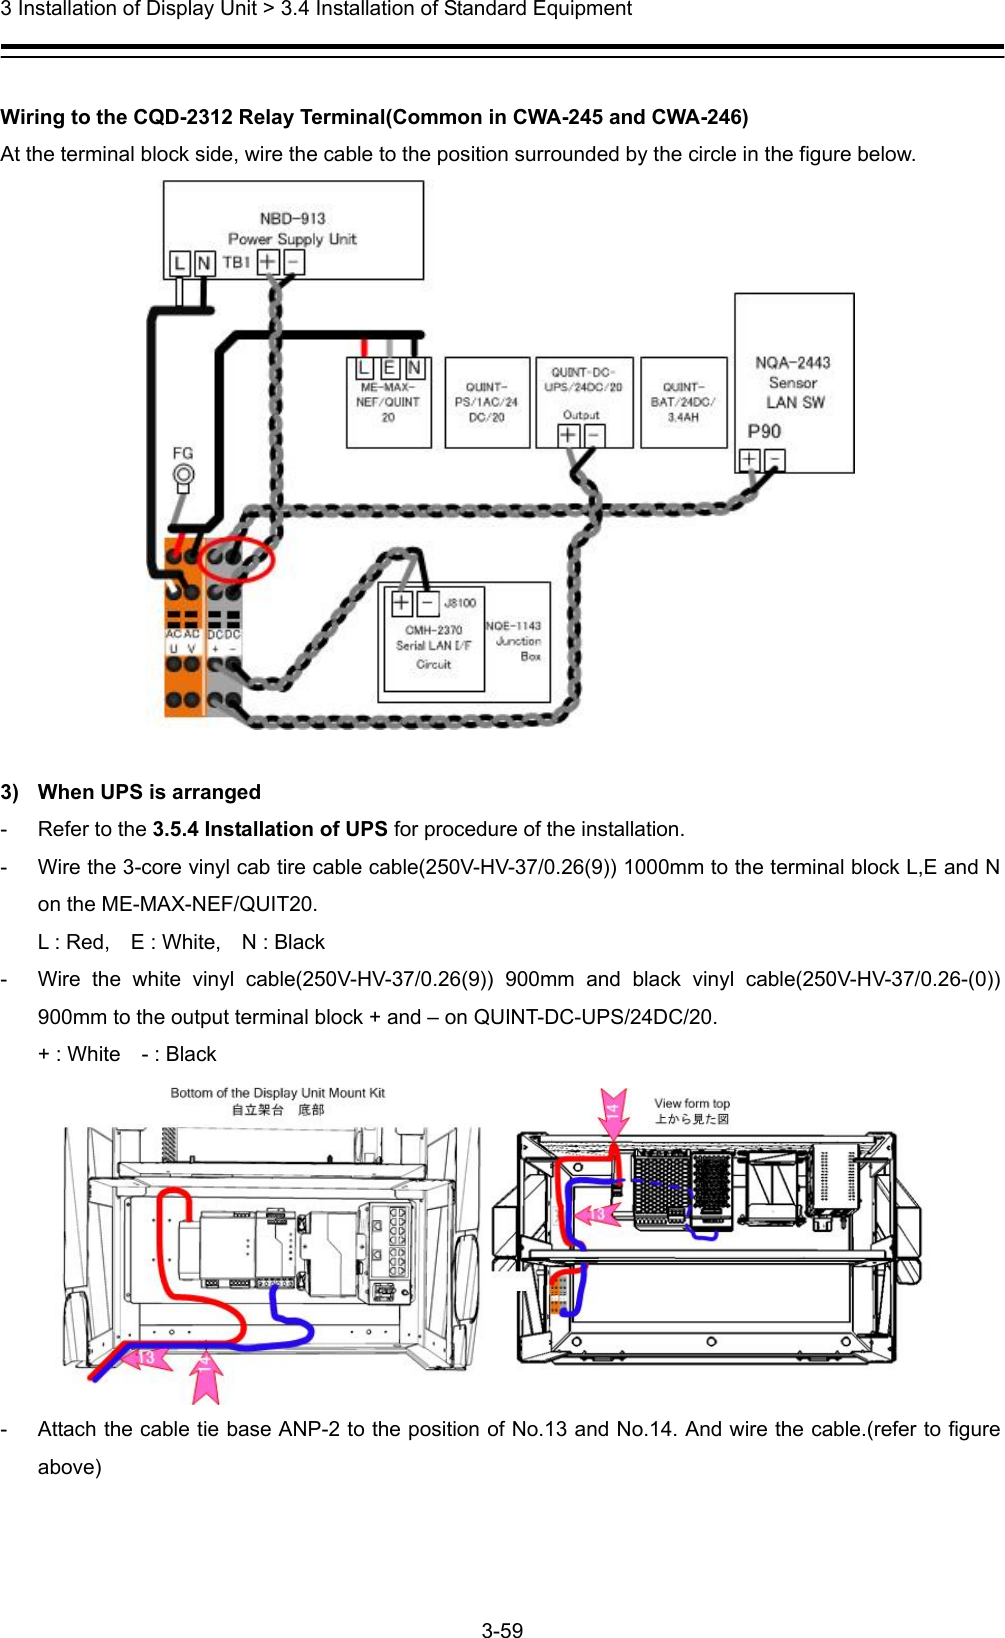  3 Installation of Display Unit &gt; 3.4 Installation of Standard Equipment 3-59   Wiring to the CQD-2312 Relay Terminal(Common in CWA-245 and CWA-246) At the terminal block side, wire the cable to the position surrounded by the circle in the figure below.     3)  When UPS is arranged -  Refer to the 3.5.4 Installation of UPS for procedure of the installation. -  Wire the 3-core vinyl cab tire cable cable(250V-HV-37/0.26(9)) 1000mm to the terminal block L,E and N on the ME-MAX-NEF/QUIT20. L : Red,    E : White,    N : Black -  Wire the white vinyl cable(250V-HV-37/0.26(9)) 900mm and black vinyl cable(250V-HV-37/0.26-(0)) 900mm to the output terminal block + and – on QUINT-DC-UPS/24DC/20. + : White    - : Black  -  Attach the cable tie base ANP-2 to the position of No.13 and No.14. And wire the cable.(refer to figure above) 